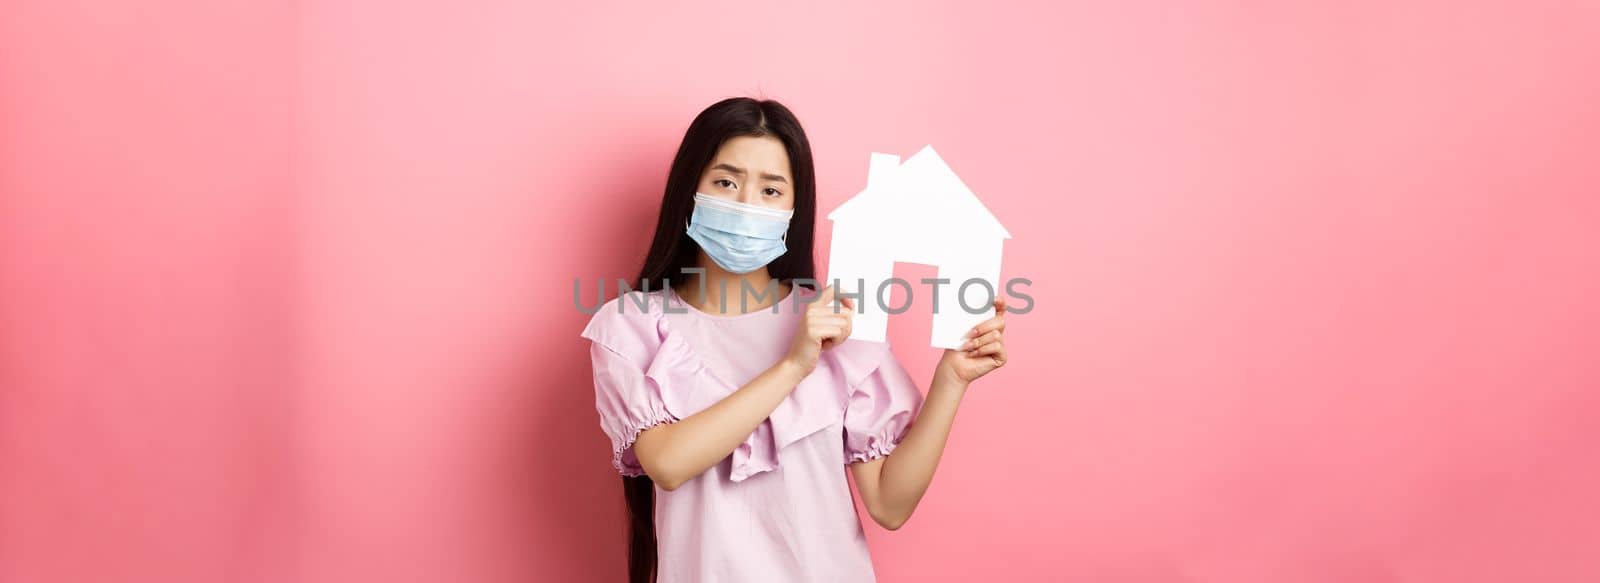 Real estate and pandemic concept. Gloomy girl showing paper house cutout, wearing medical mask and dress, standing against pink background by Benzoix